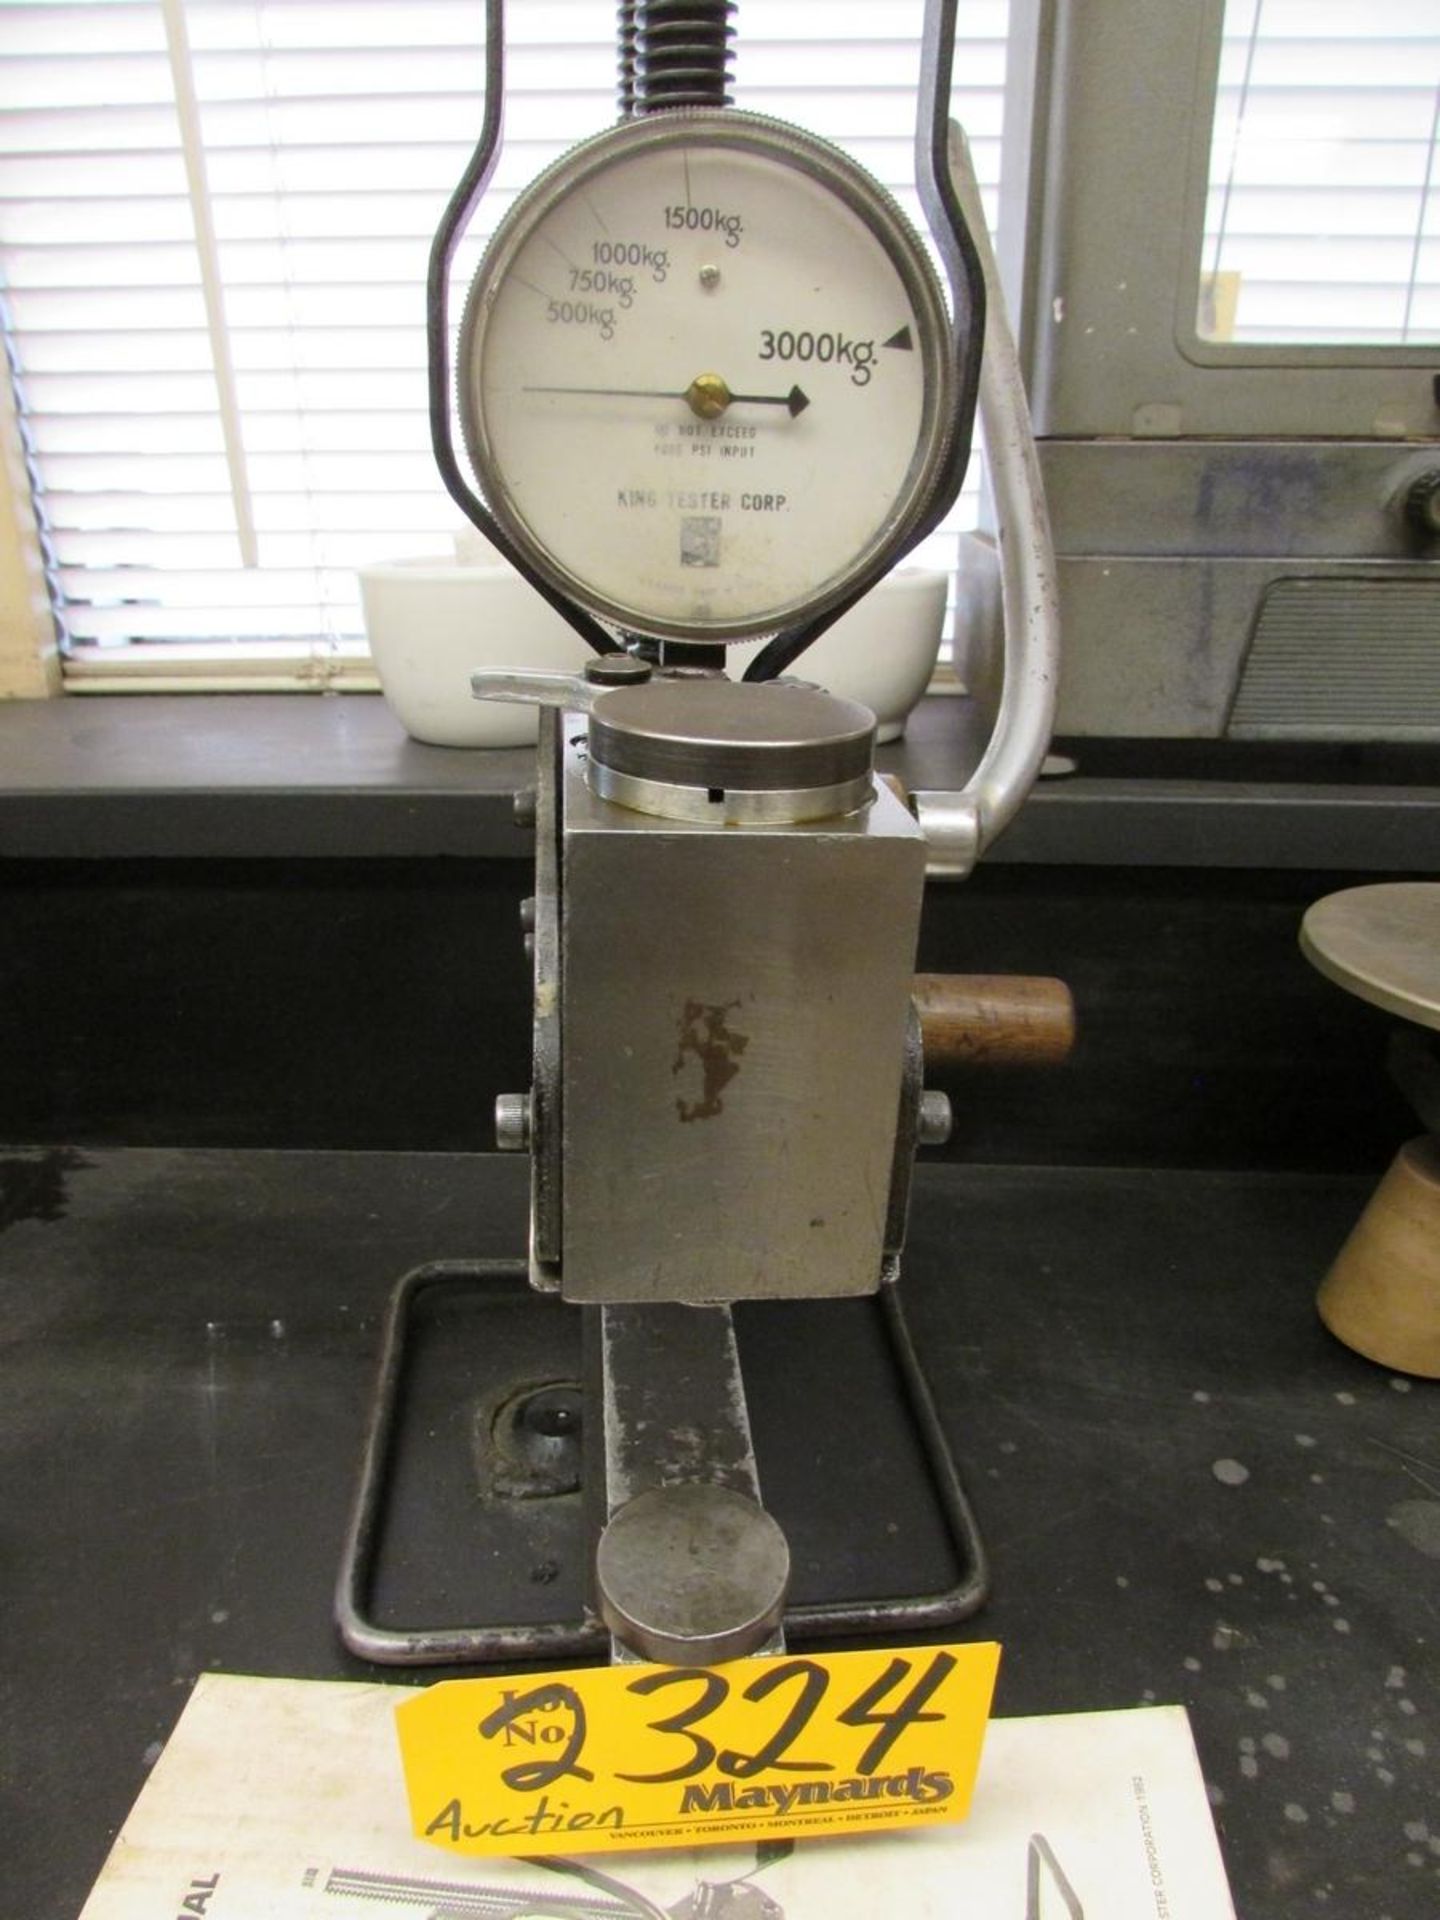 King Tester Co. Portable Brinell Hardness Tester - Image 2 of 3